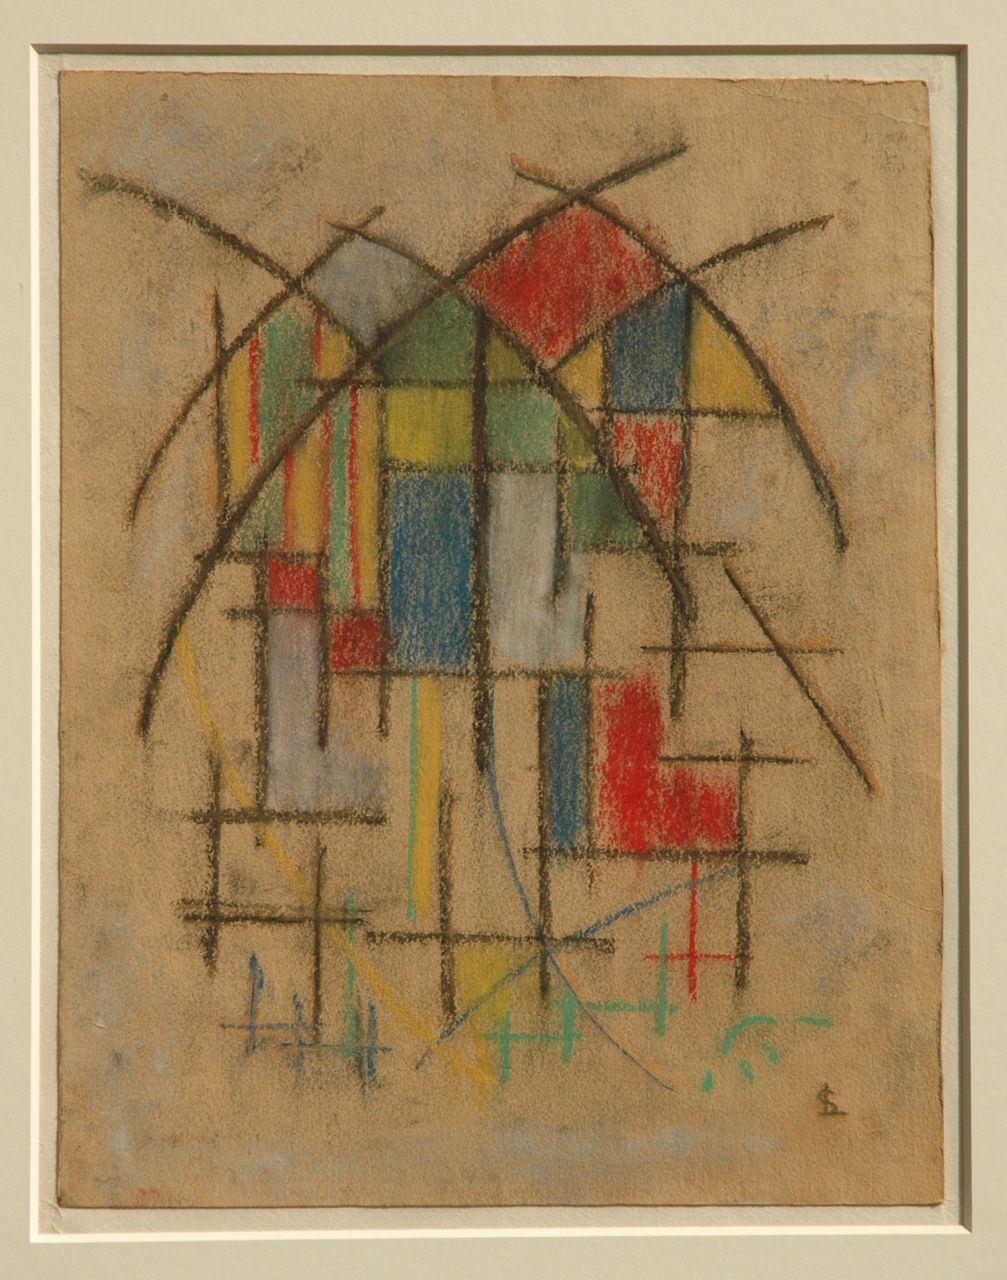 Saalborn L.A.A.  | 'Louis' Alexander Abraham Saalborn, A design for a church window, pastel on paper 29.5 x 23.0 cm, signed l.r. with monogram and te dateren ca. 1918-1933